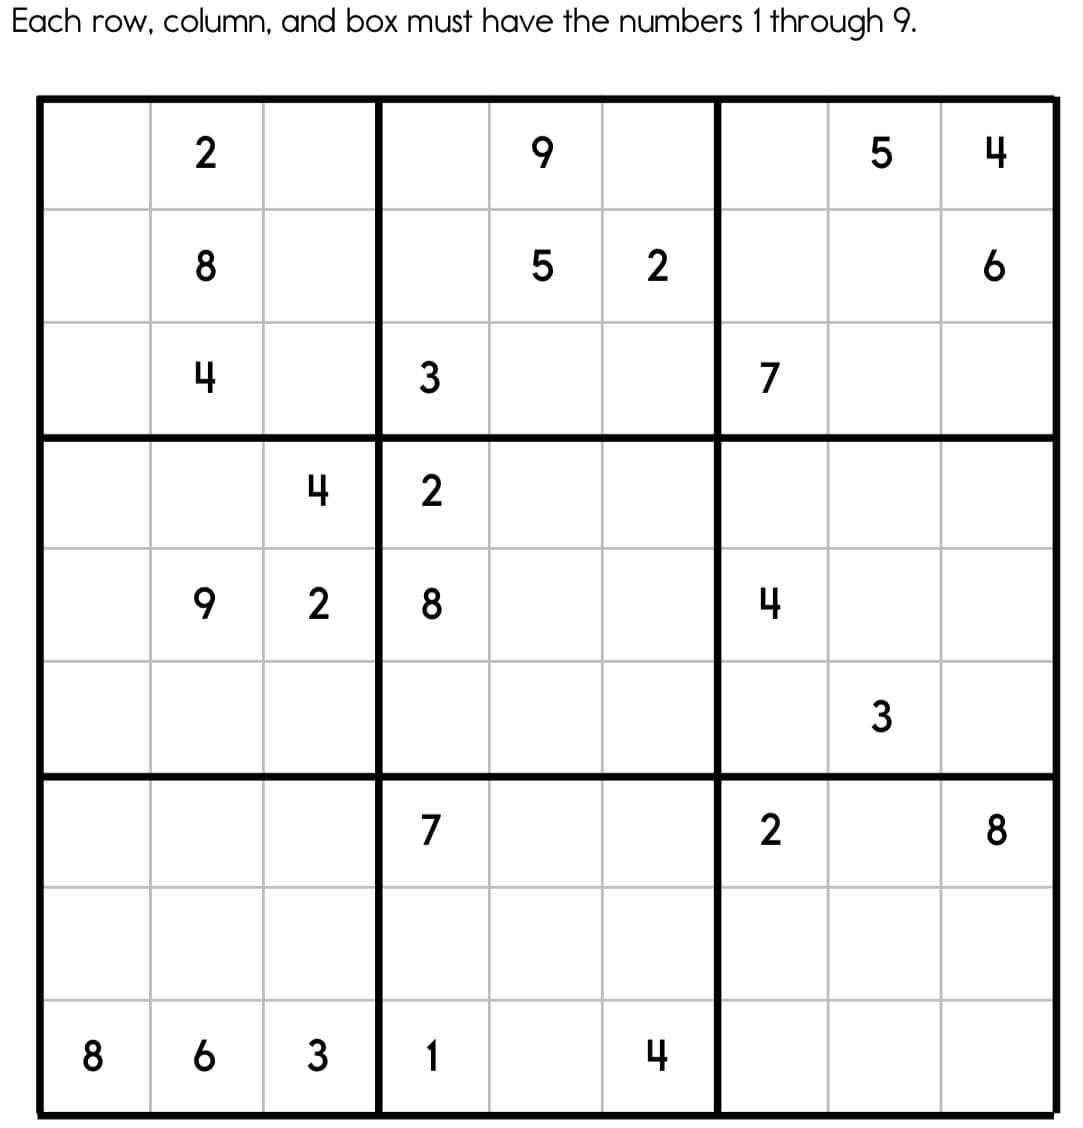 Each row, column, and box must have the numbers 1 through 9.
2
4
5
2
4
3
7
4
2
9 2
4
3
7
2
8
8 6 3
1
4
